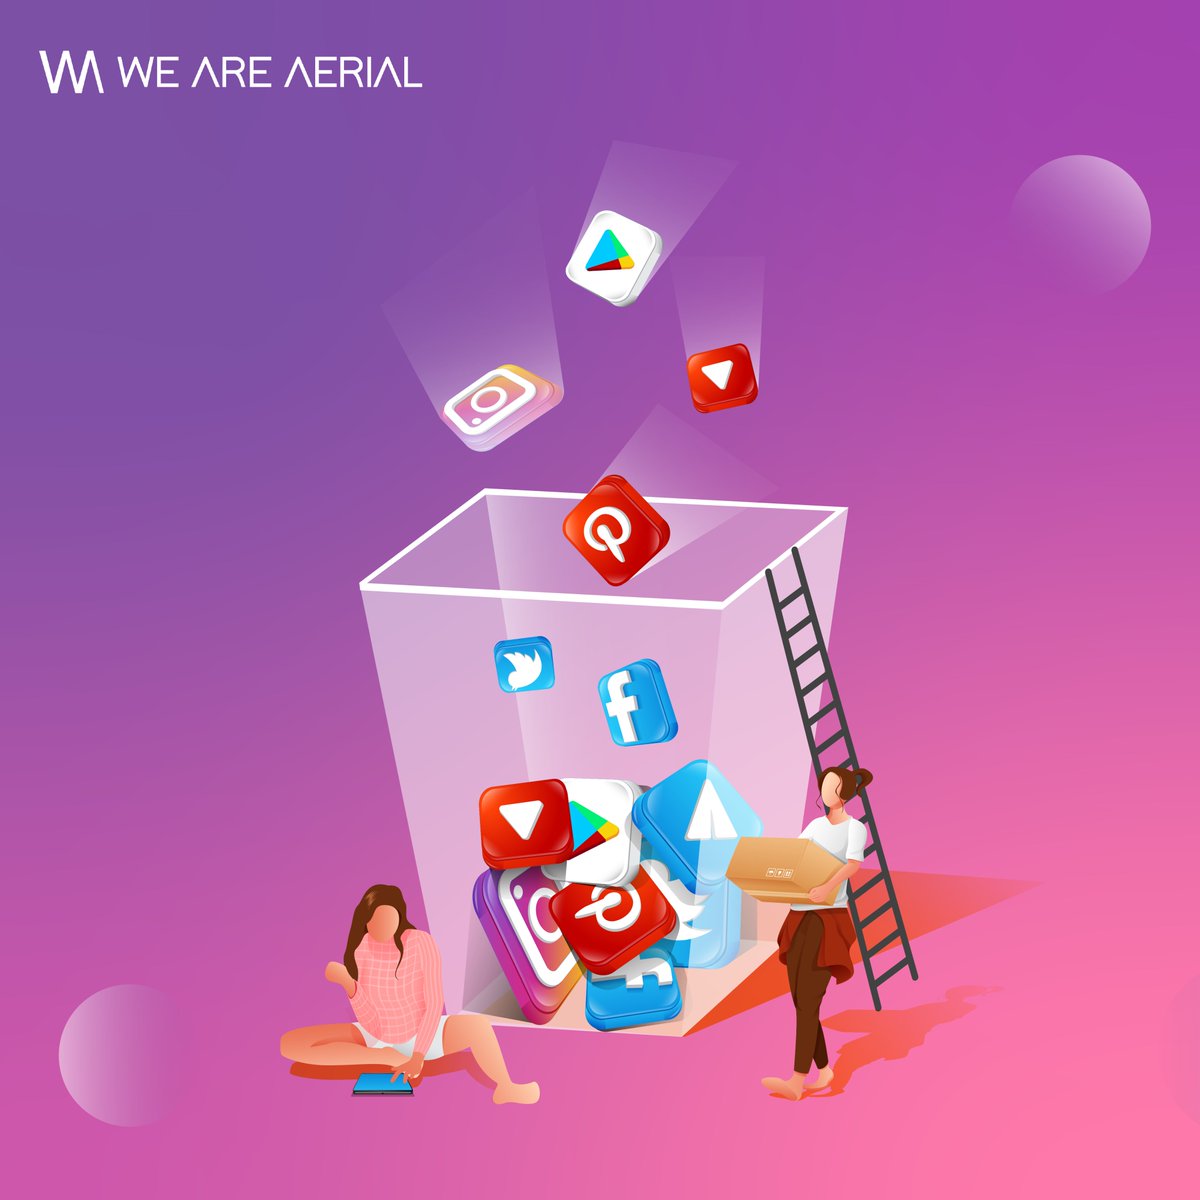 🚀 Harness the Power of Your Brand with We Are Aerial! Elevate your online presence and stand out from the crowd with our expert Social Media Branding services. 🌟 bit.ly/weareaerial 

#DigitalMarketing #MarketingAgency #BrandDevelopment #BrandingDesign #WeAreAerial